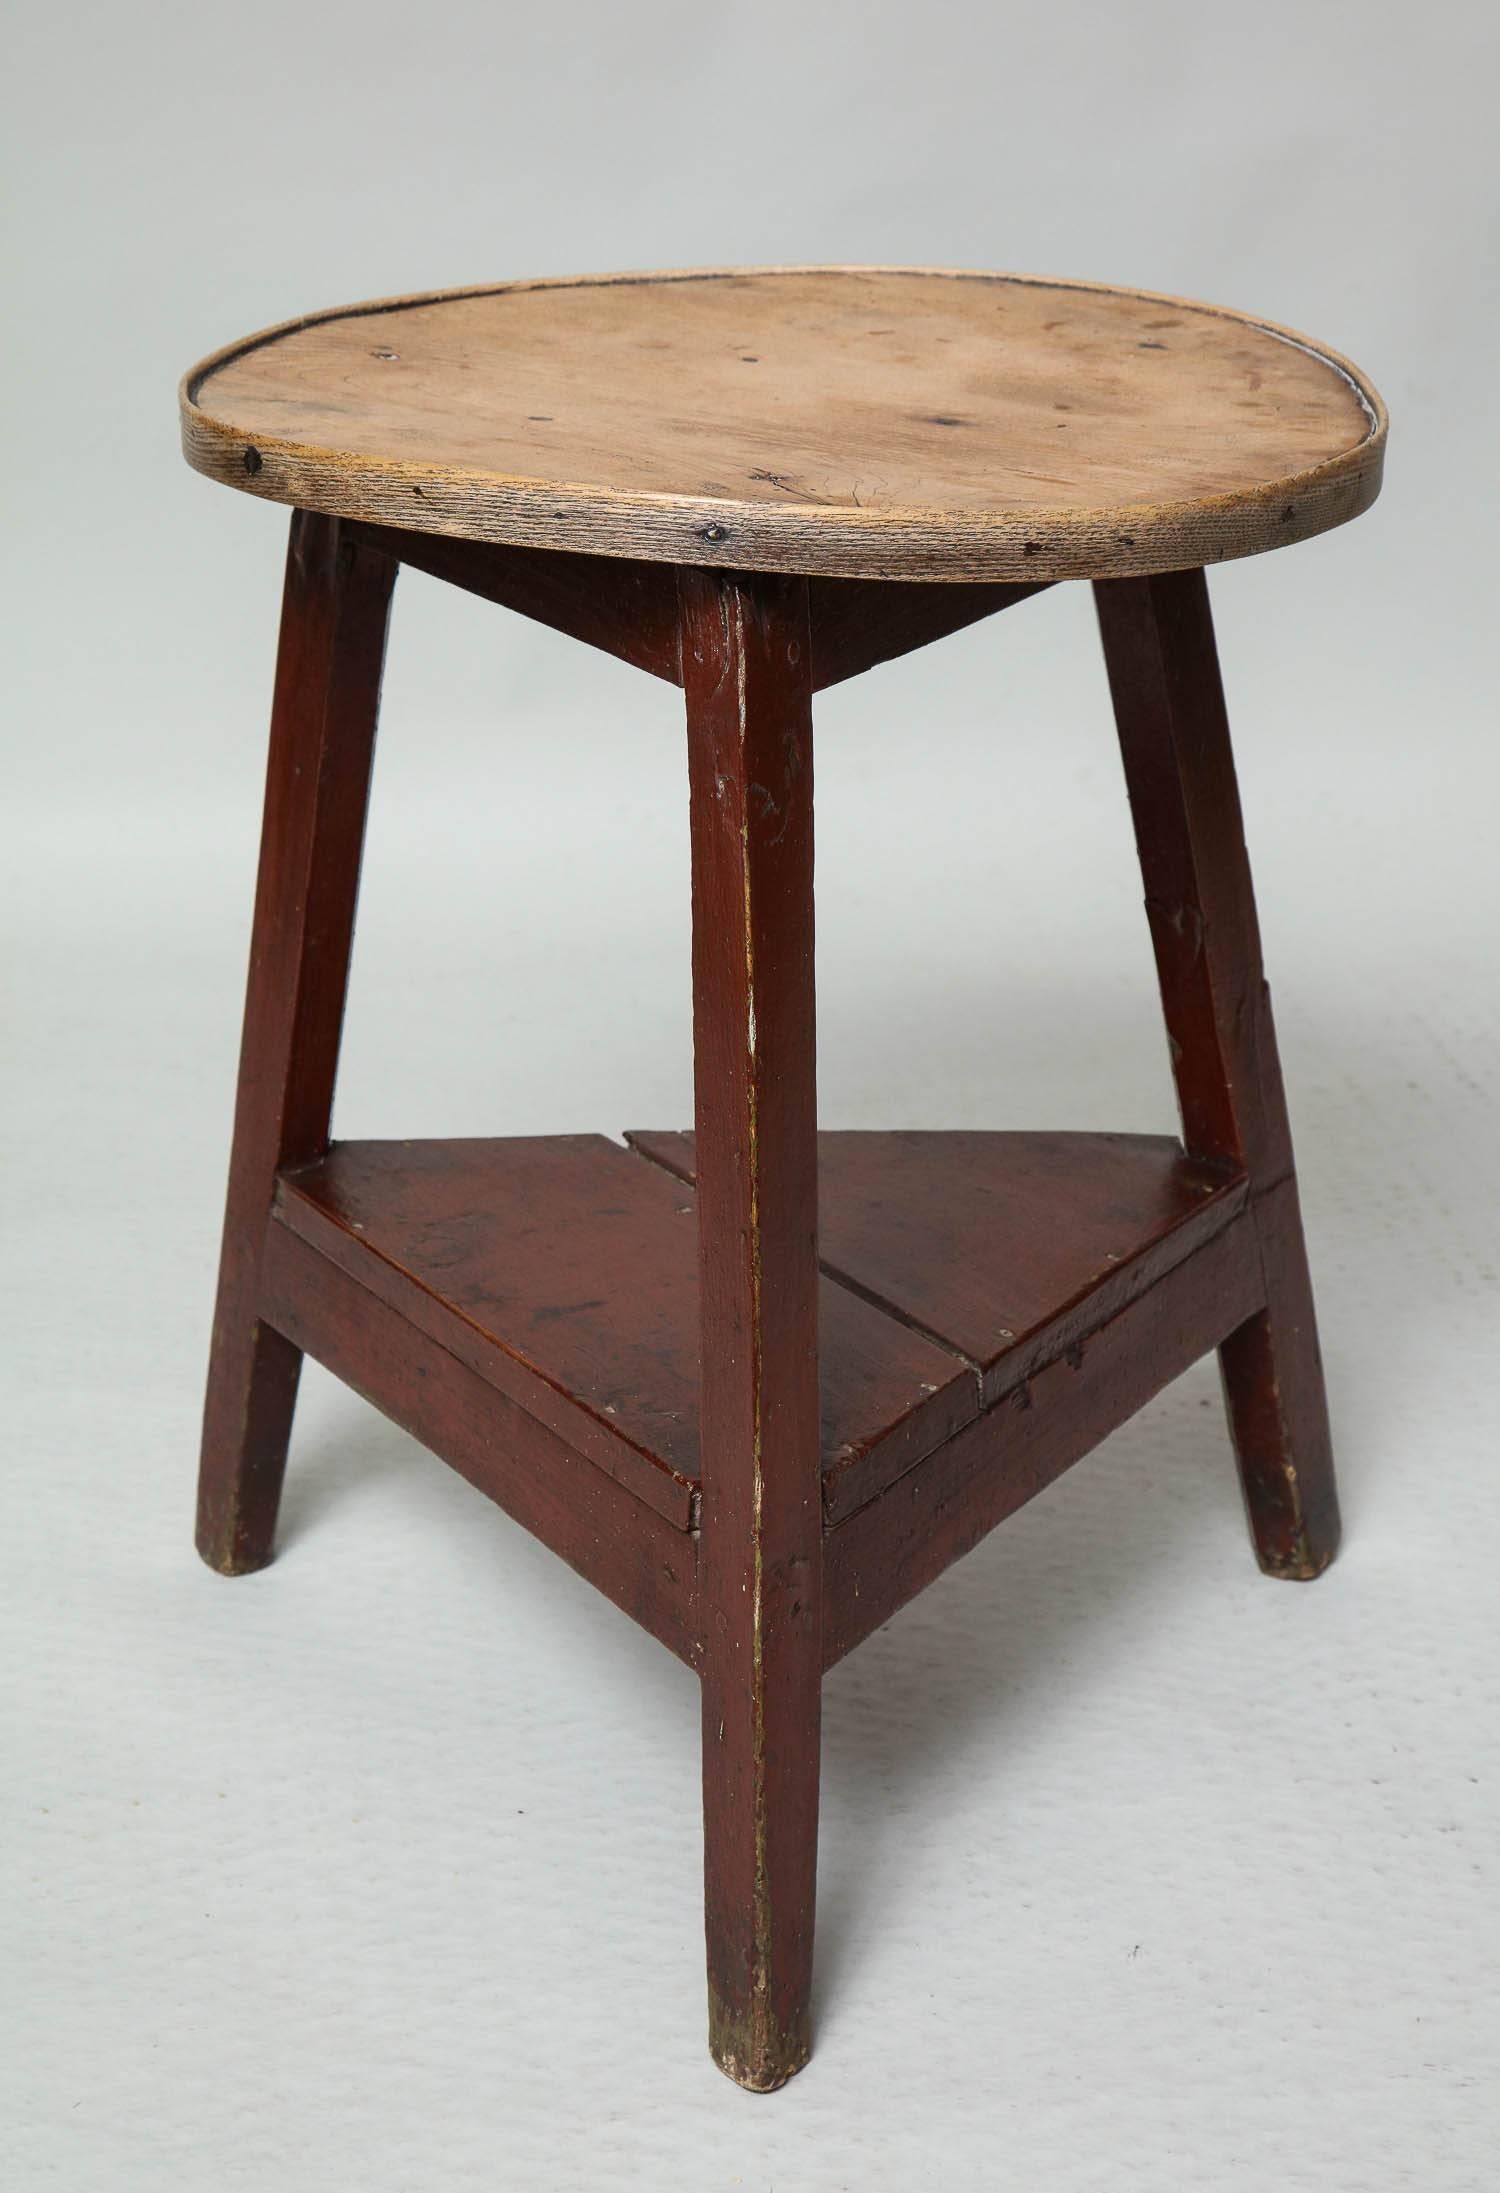 Good early 19th century scrubbed elm cricket table, the single board top with 'elm twist' surface and with banded edge, over three splayed legs joined by under tier stretcher base all retaining original deep red paint.